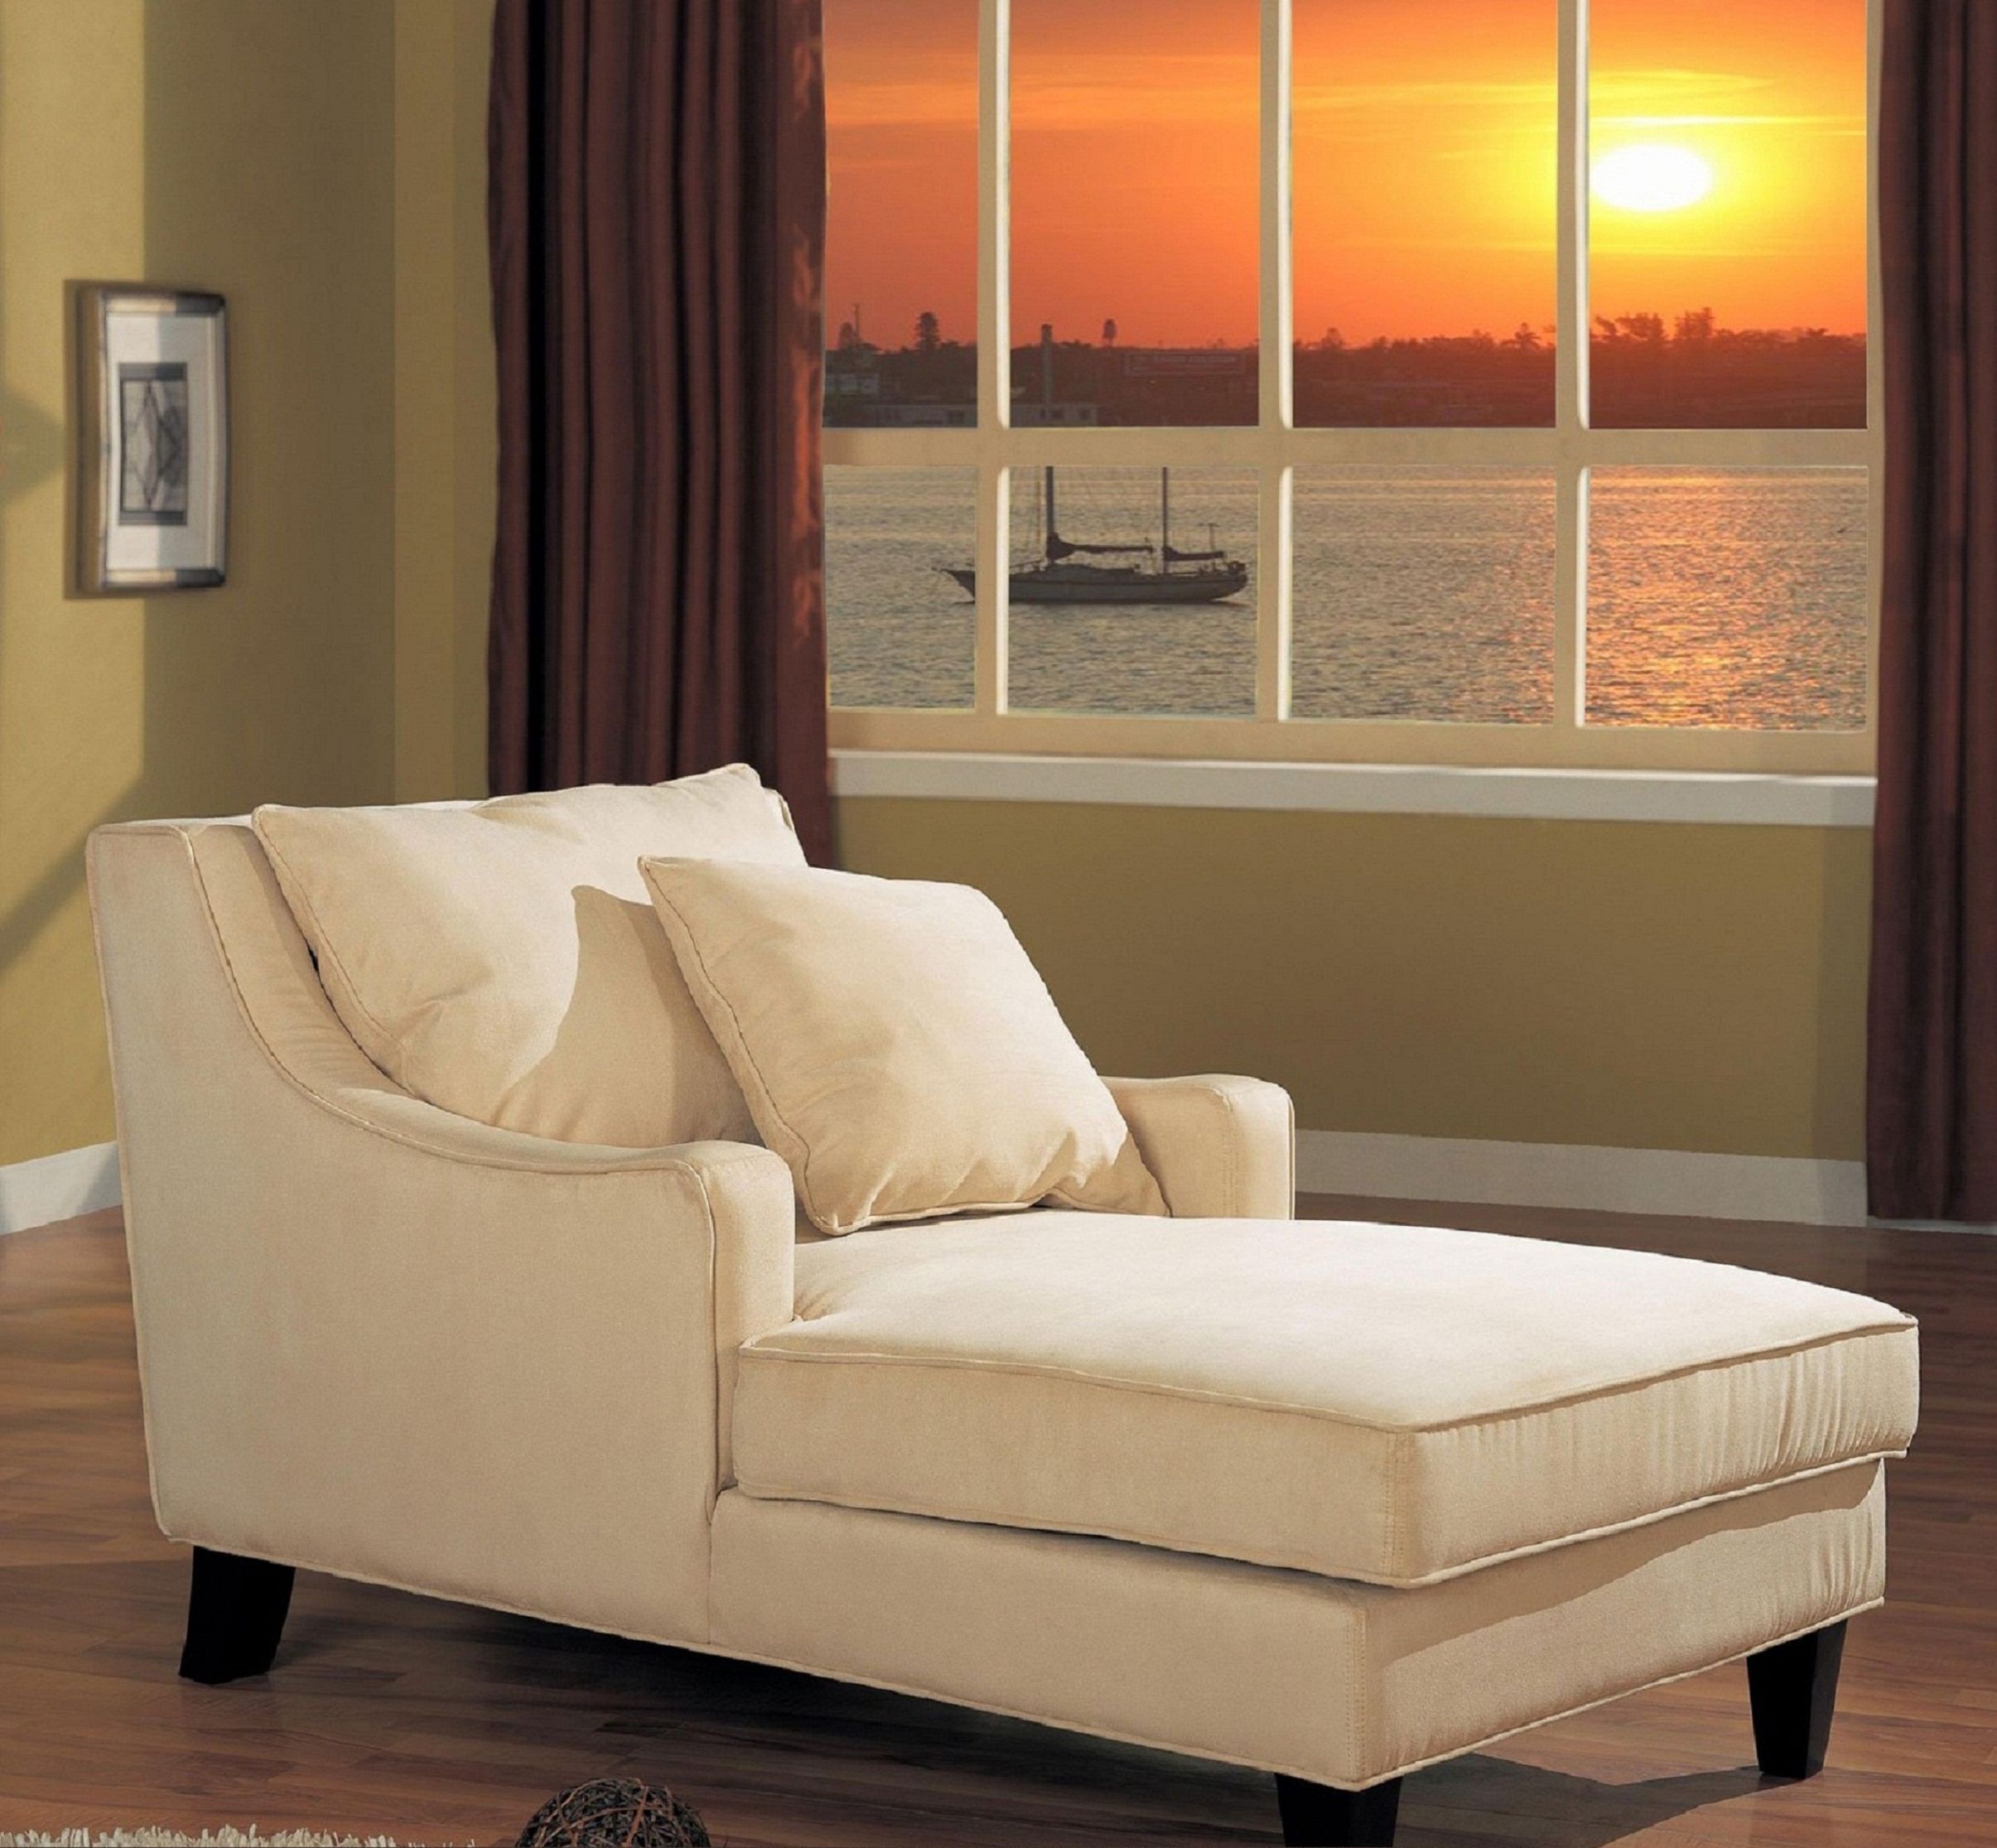 Upholstered Chaise Lounges Regarding Well Known Wide Beige Upholstered Chaise Lounge With Arm And Cushion Having (View 5 of 15)